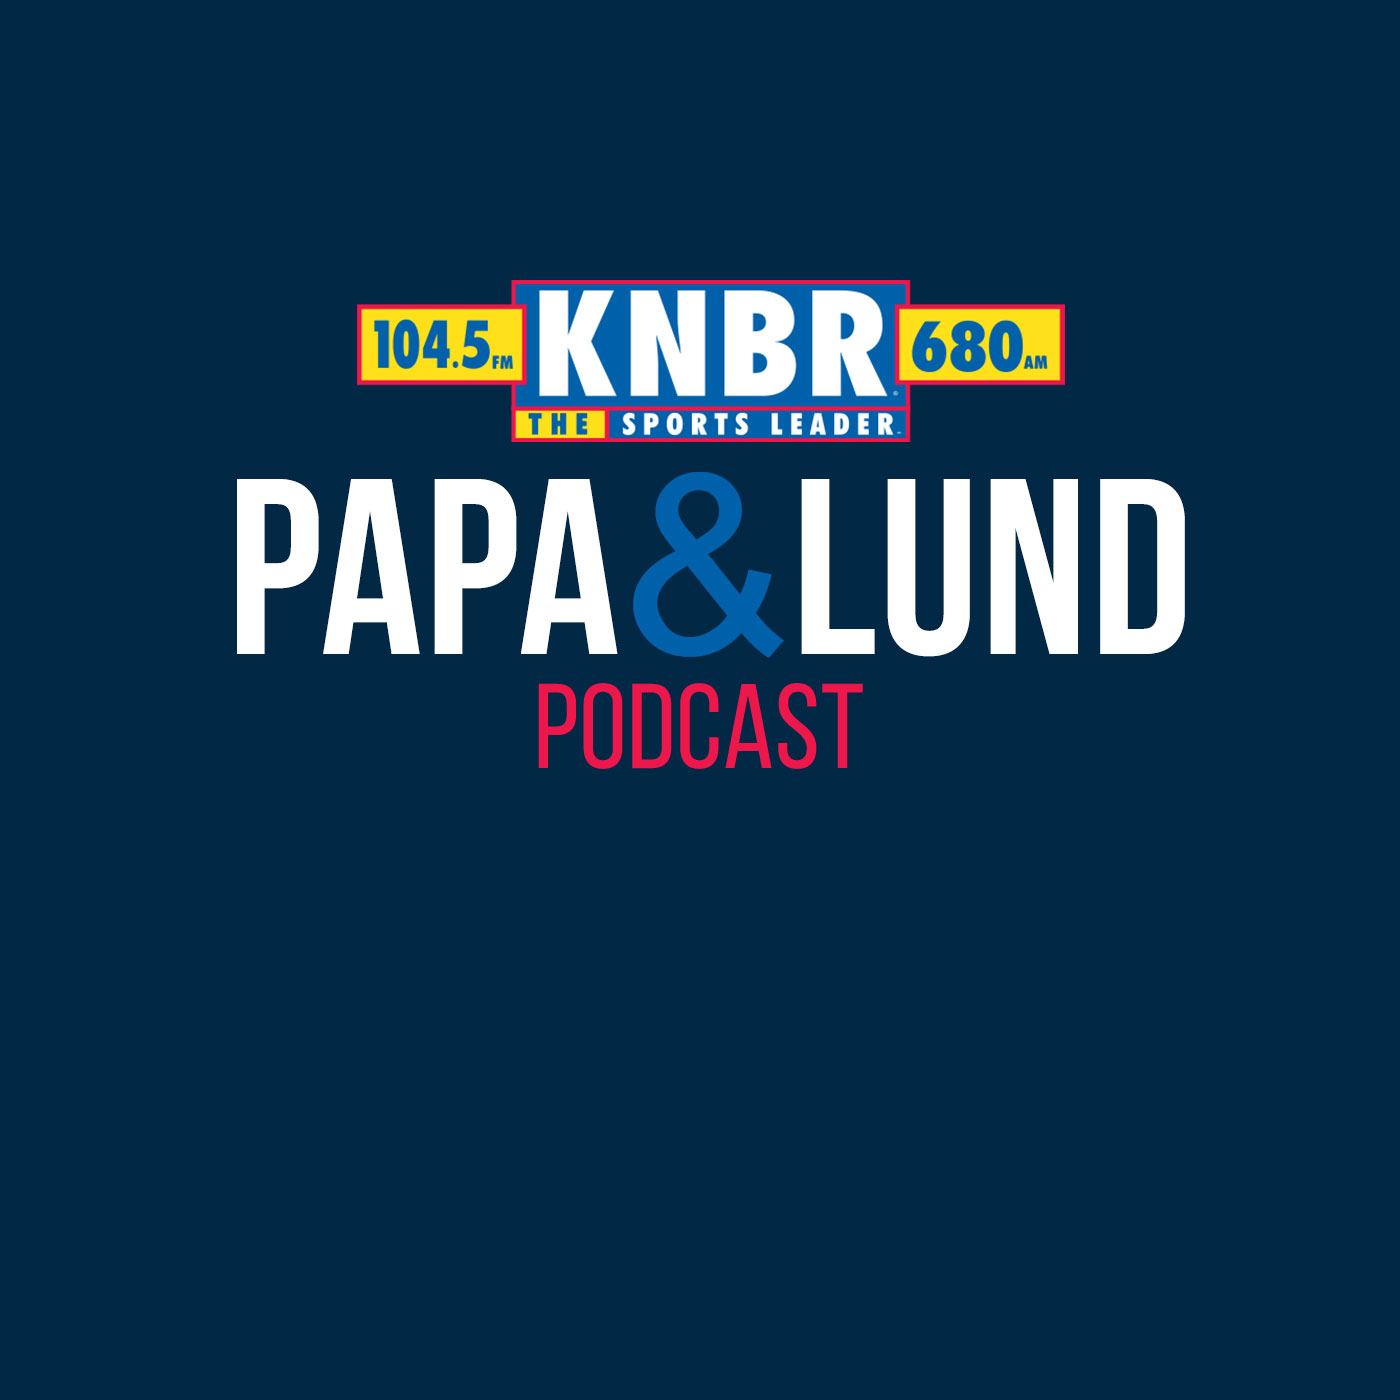 3-7 Susan Slusser discusses the start of Minor League Spring Training with Papa & Lund